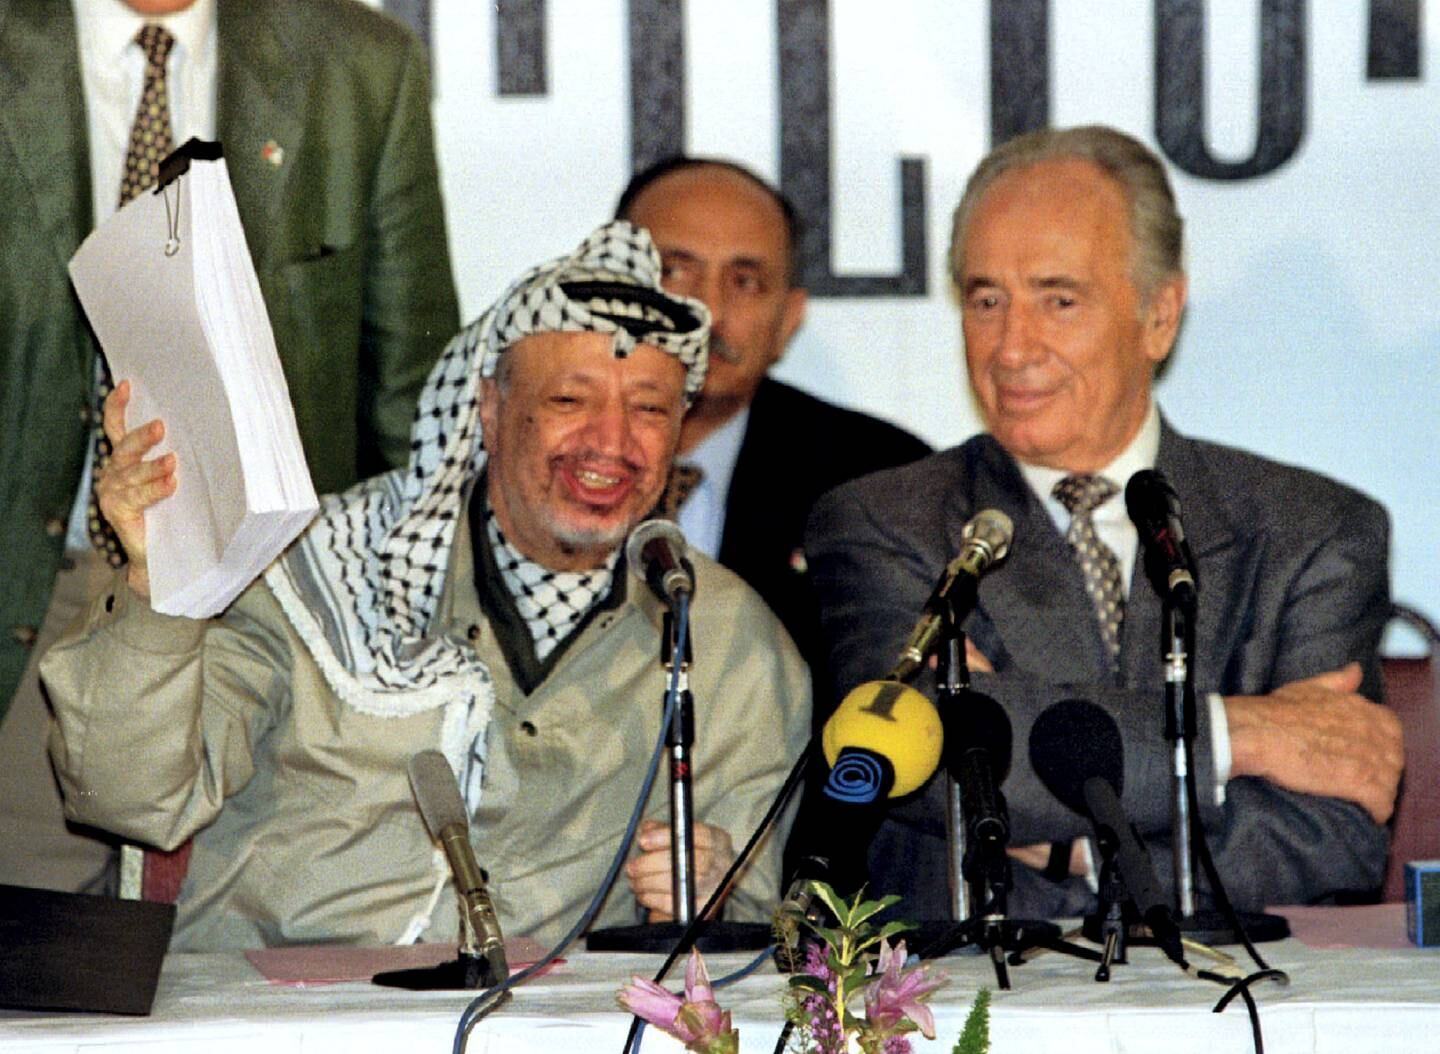 PLO chairman Yasser Arafat holds the second phase of the Oslo peace accords after the initialling of the document, September 24, as Israeli Foreign Minister Shimon Peres looks on. Israel and the PLO will officially sign the agreement in Washington later this week.
**POOR QUALITY DOCUMENT